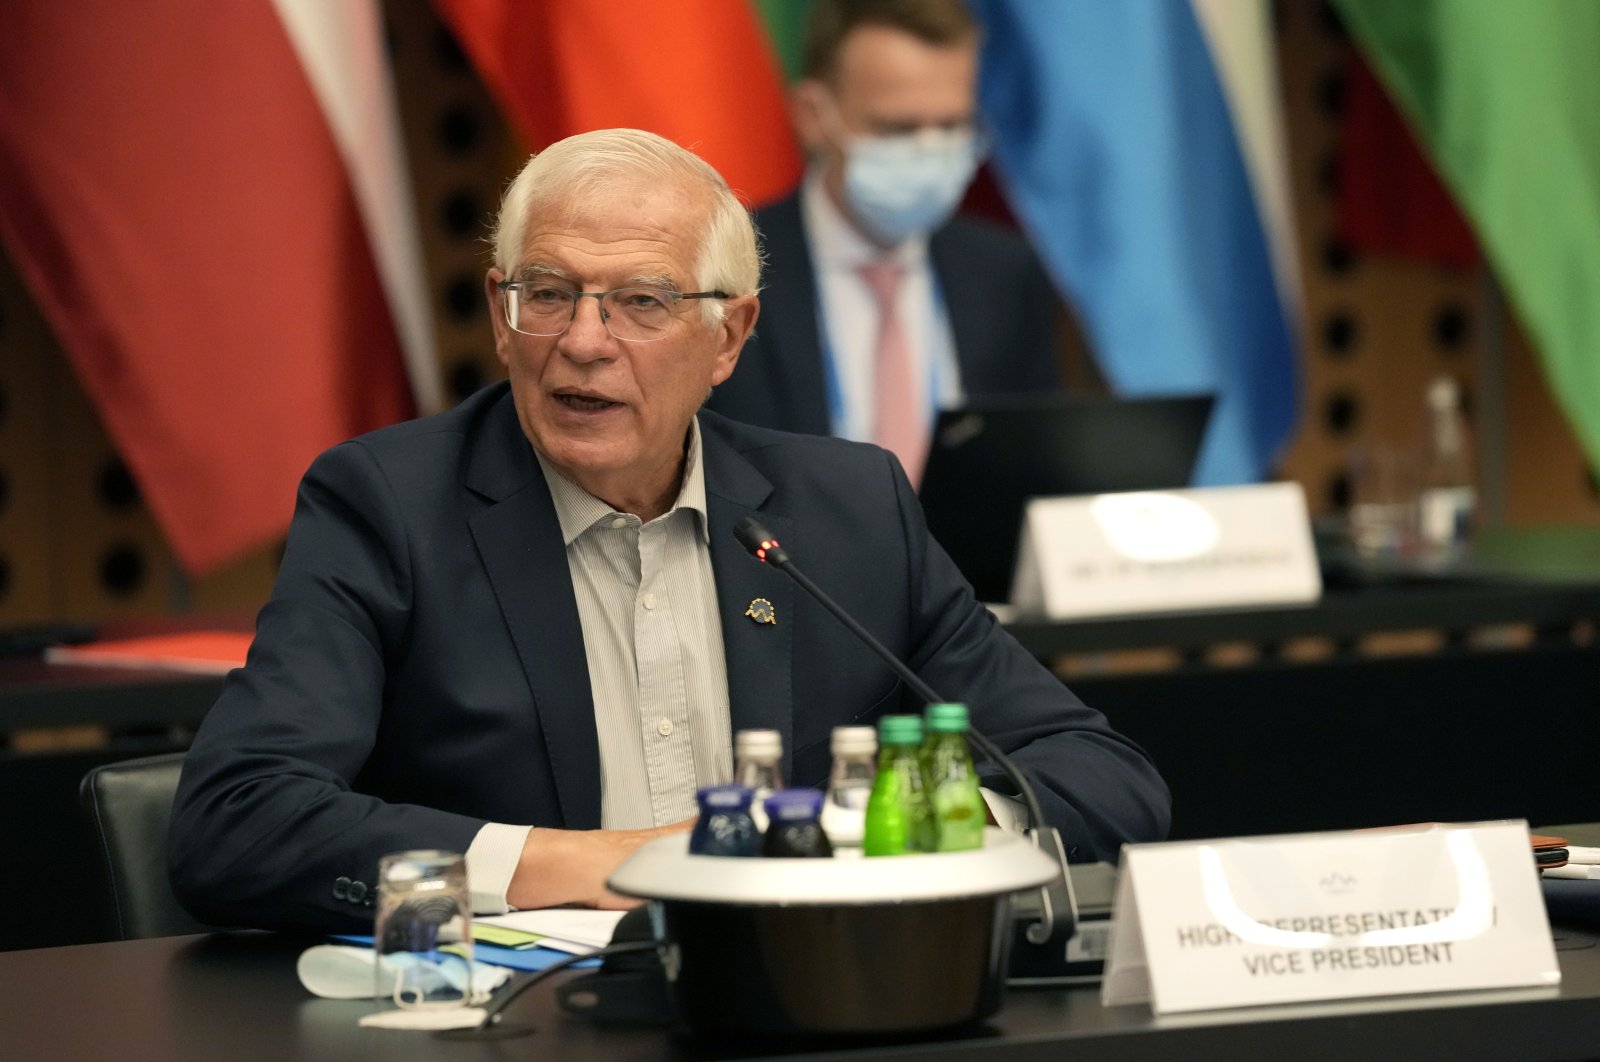 European Union foreign policy chief Josep Borrell (C) chairs a round table meeting of EU foreign ministers at the Brdo Congress Center in Kranj, Slovenia, Sept. 2, 2021. (AP Photo)